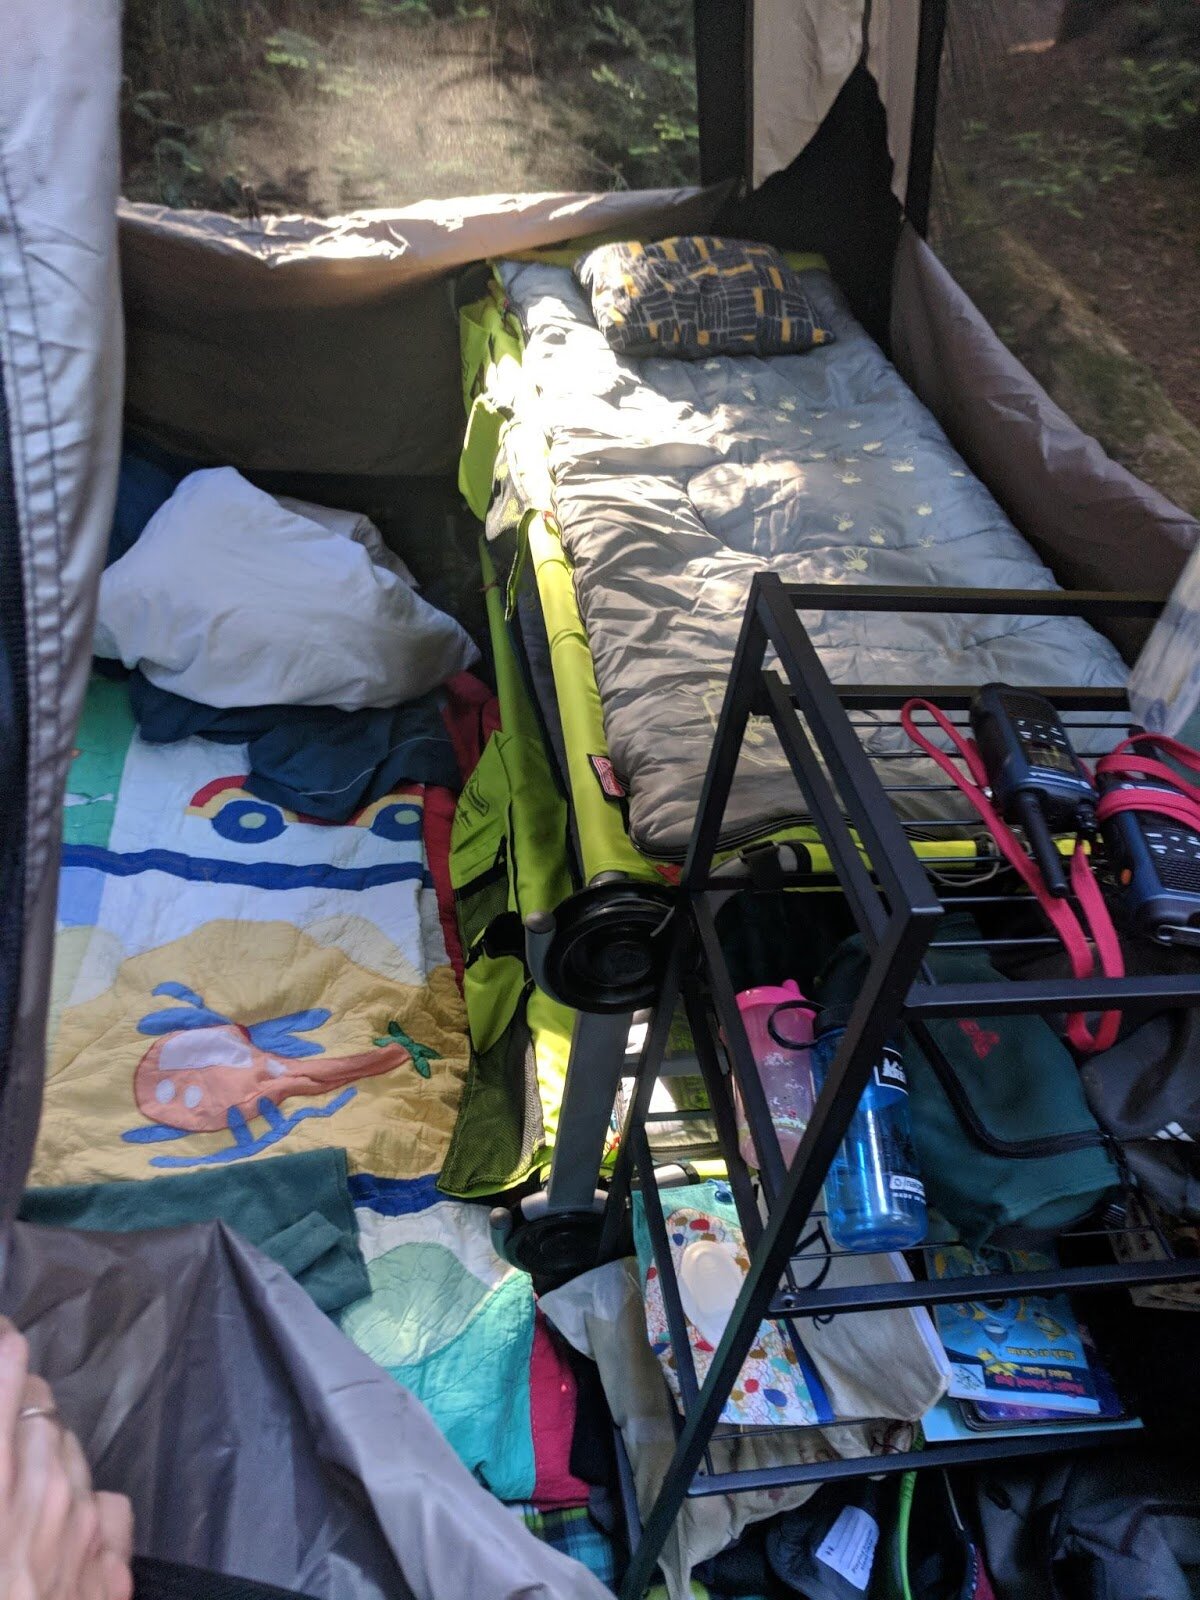 A Mom's Ultimate Car Camping Hack: The Camping Box